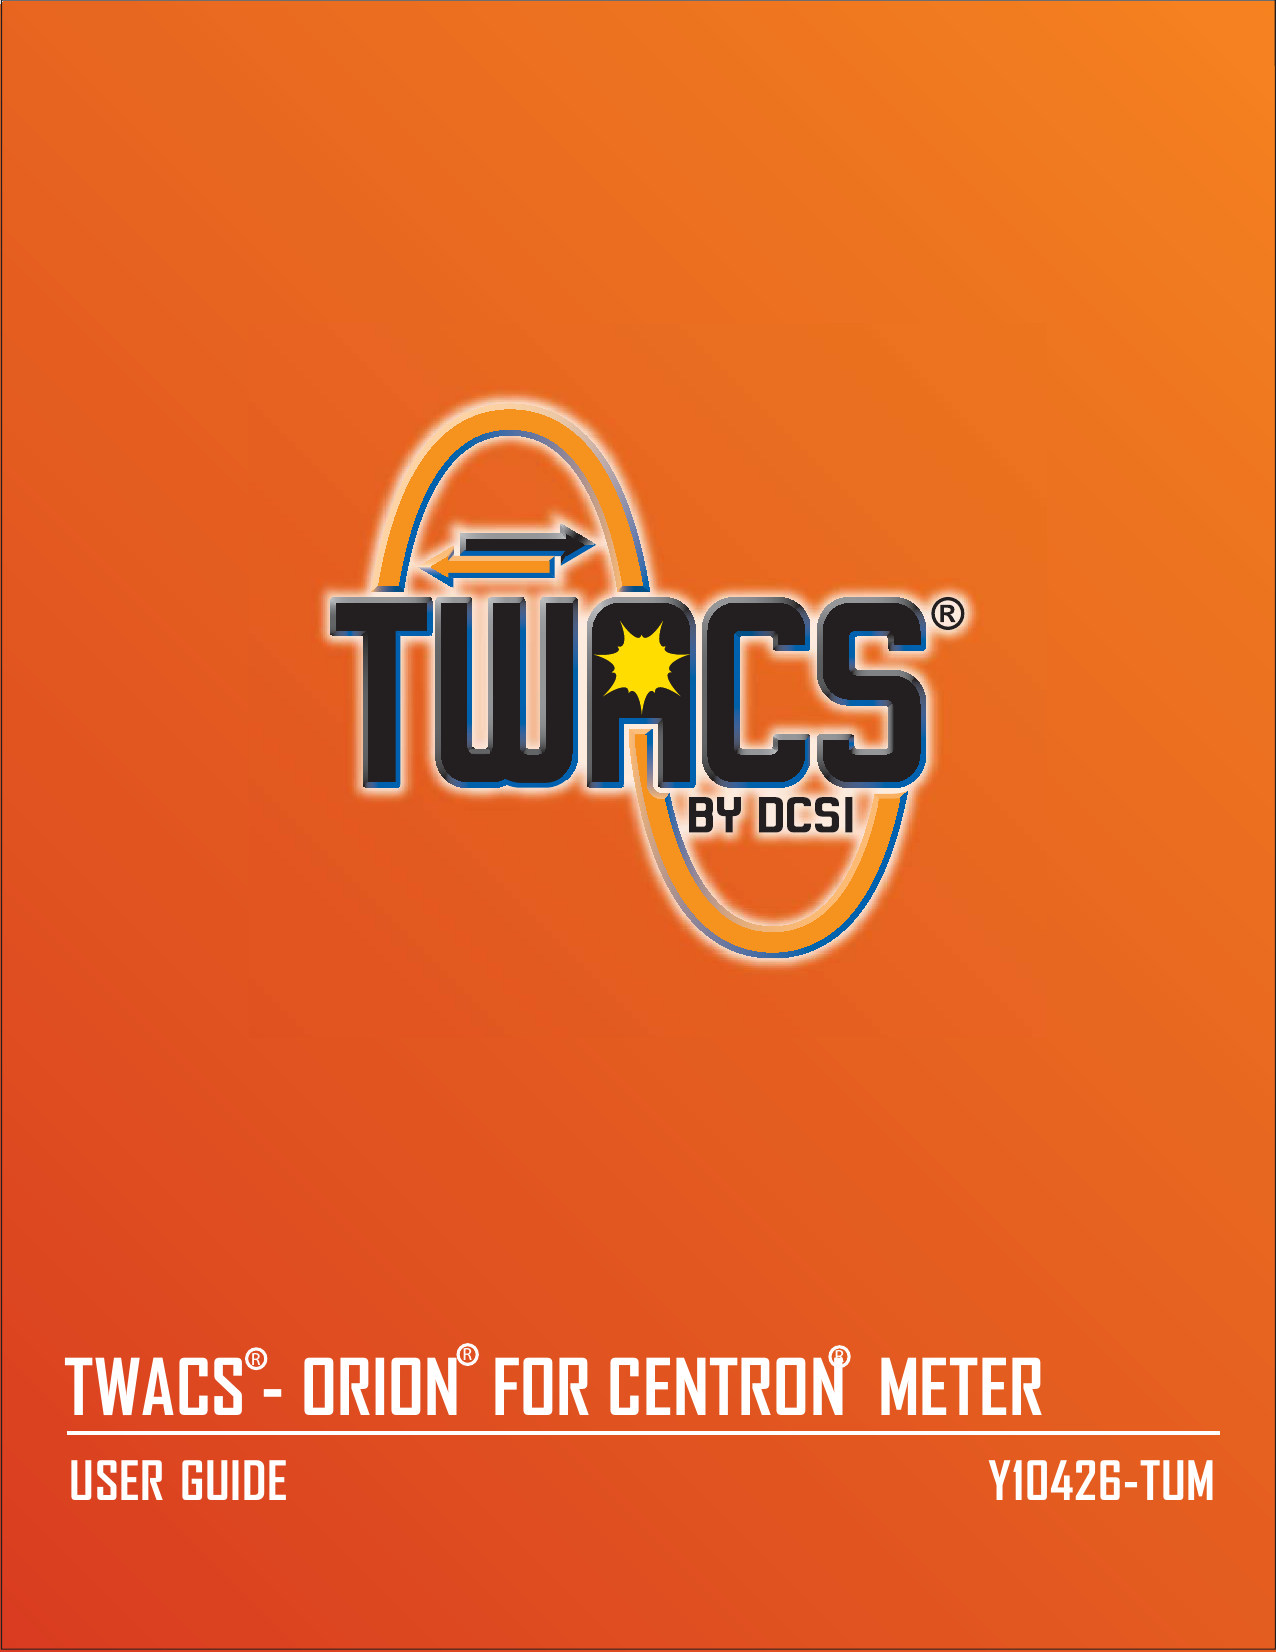 DRAFTTWACS - ORION     FOR CENTRON  METERUSER GUIDE Y10426-TUMRRR